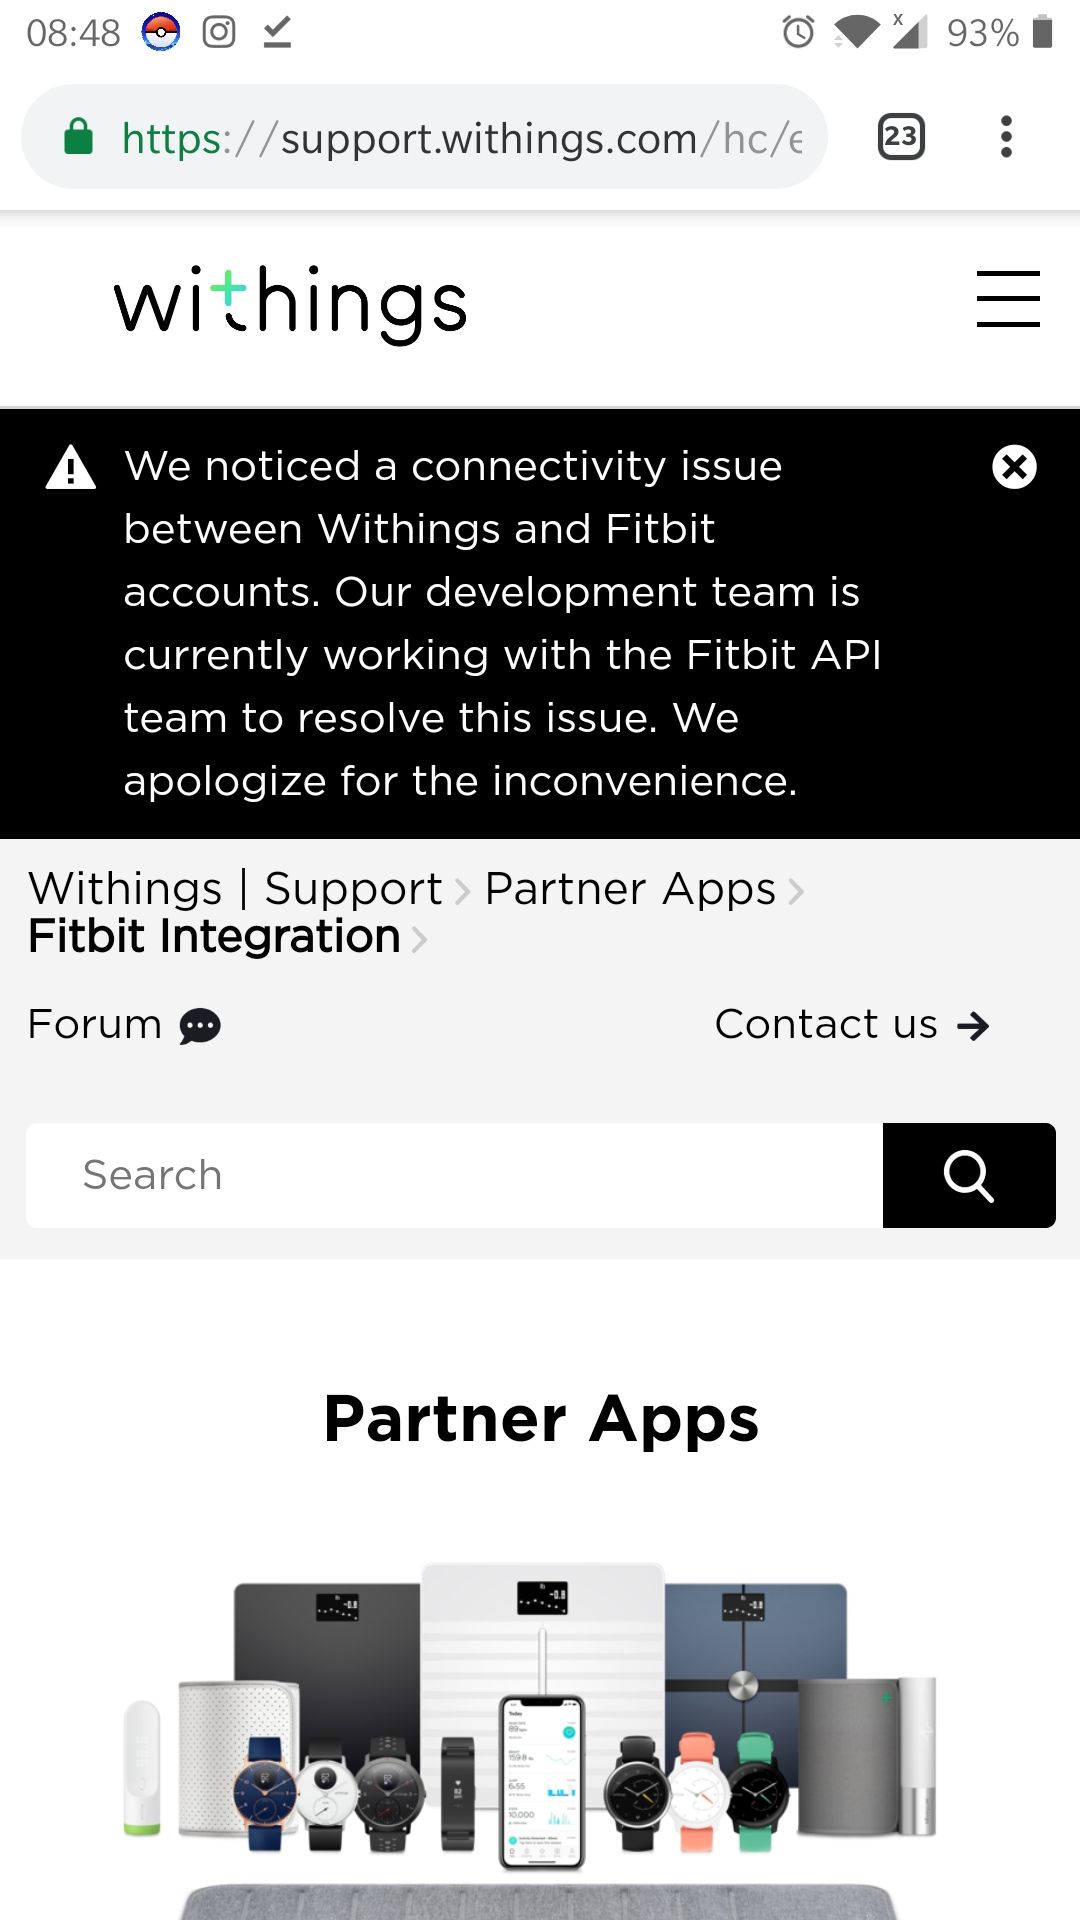 how to sync fitbit with withings scale